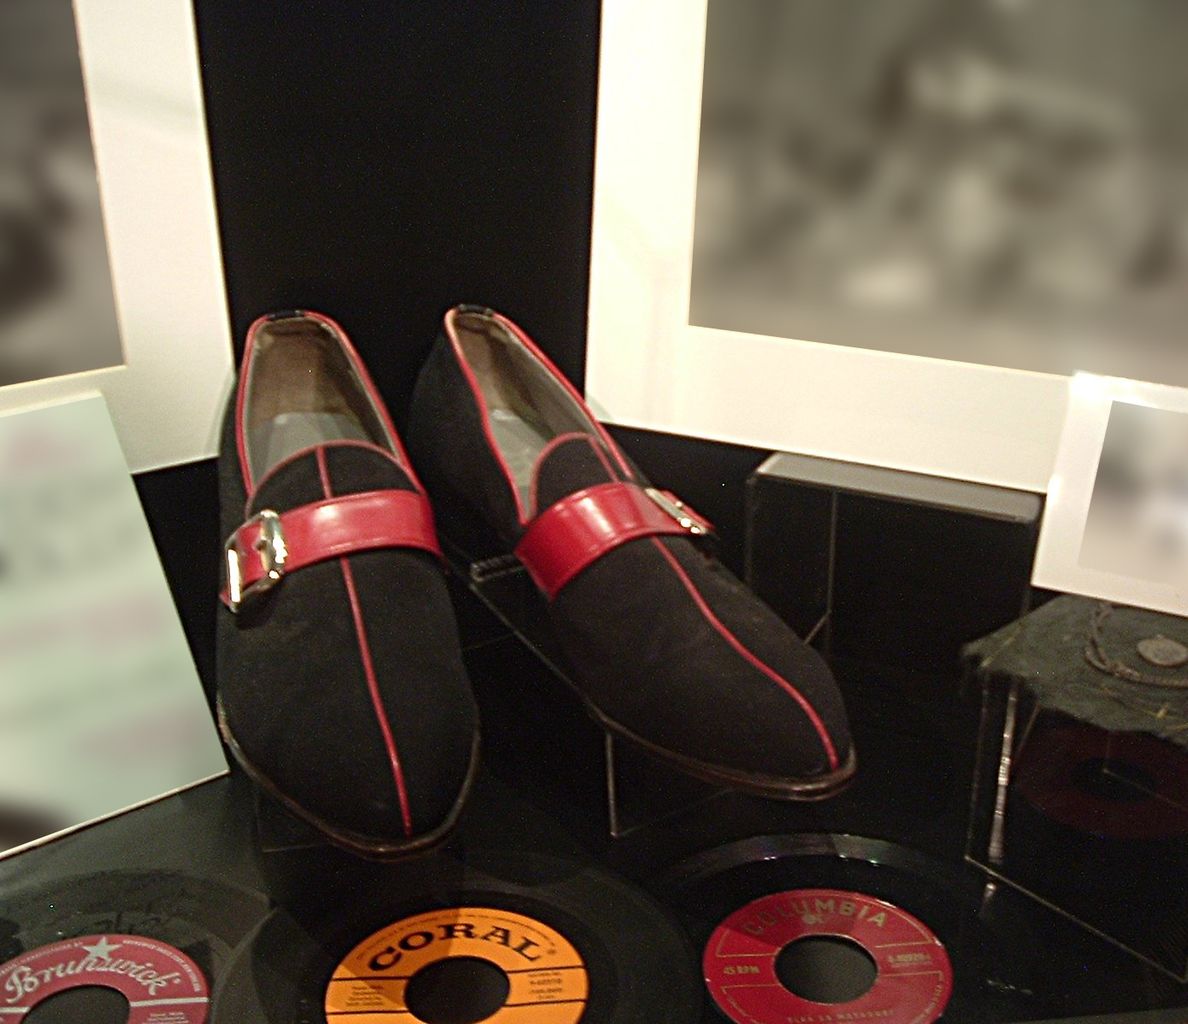 File:Buddy's Shoes, Buddy Holly Center, Lubbock, TX.jpg - Wikimedia Commons